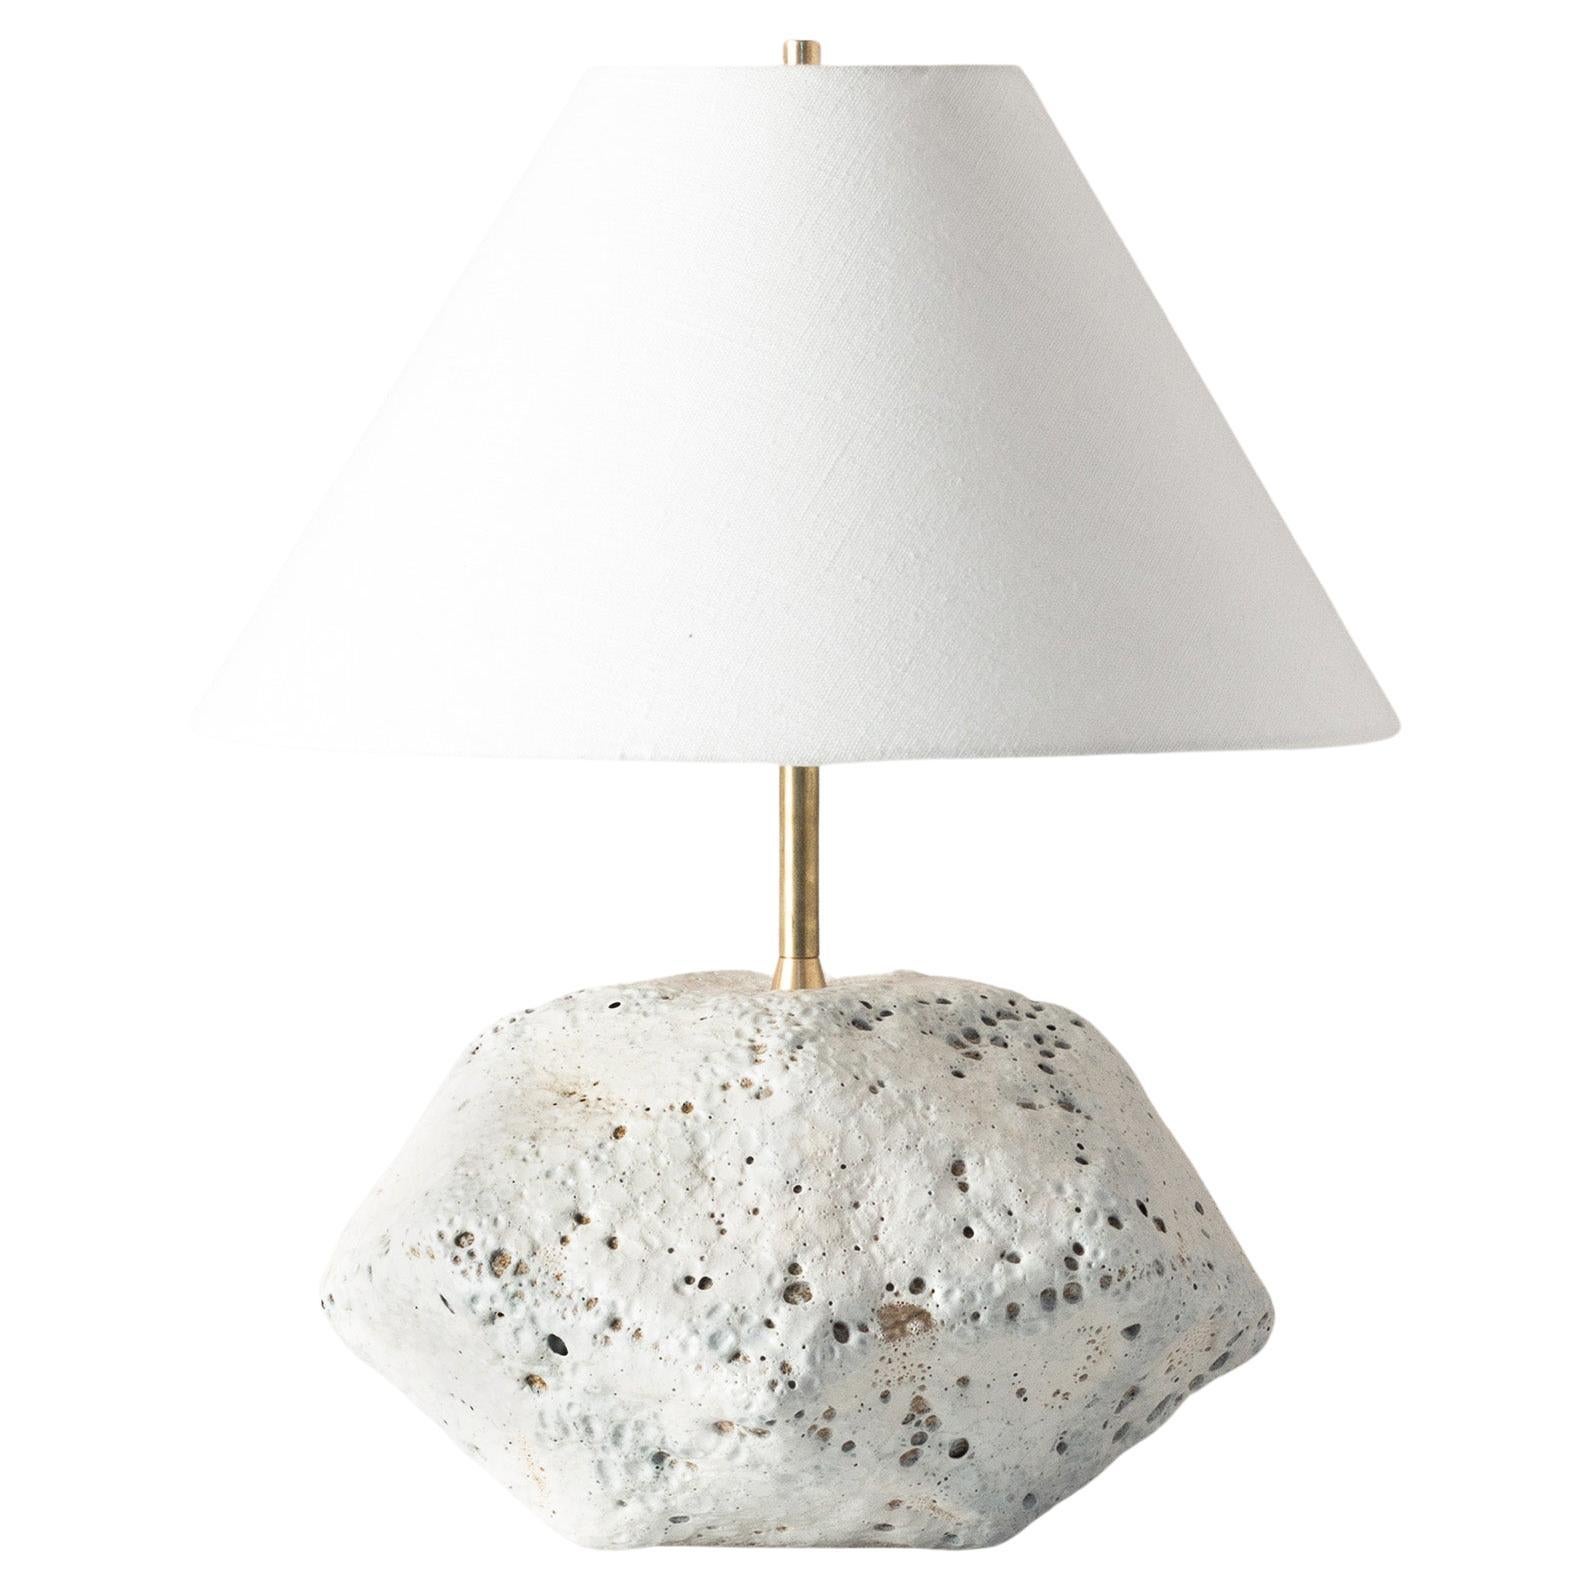 Meteor - Textured White Ceramic Table Lamp For Sale